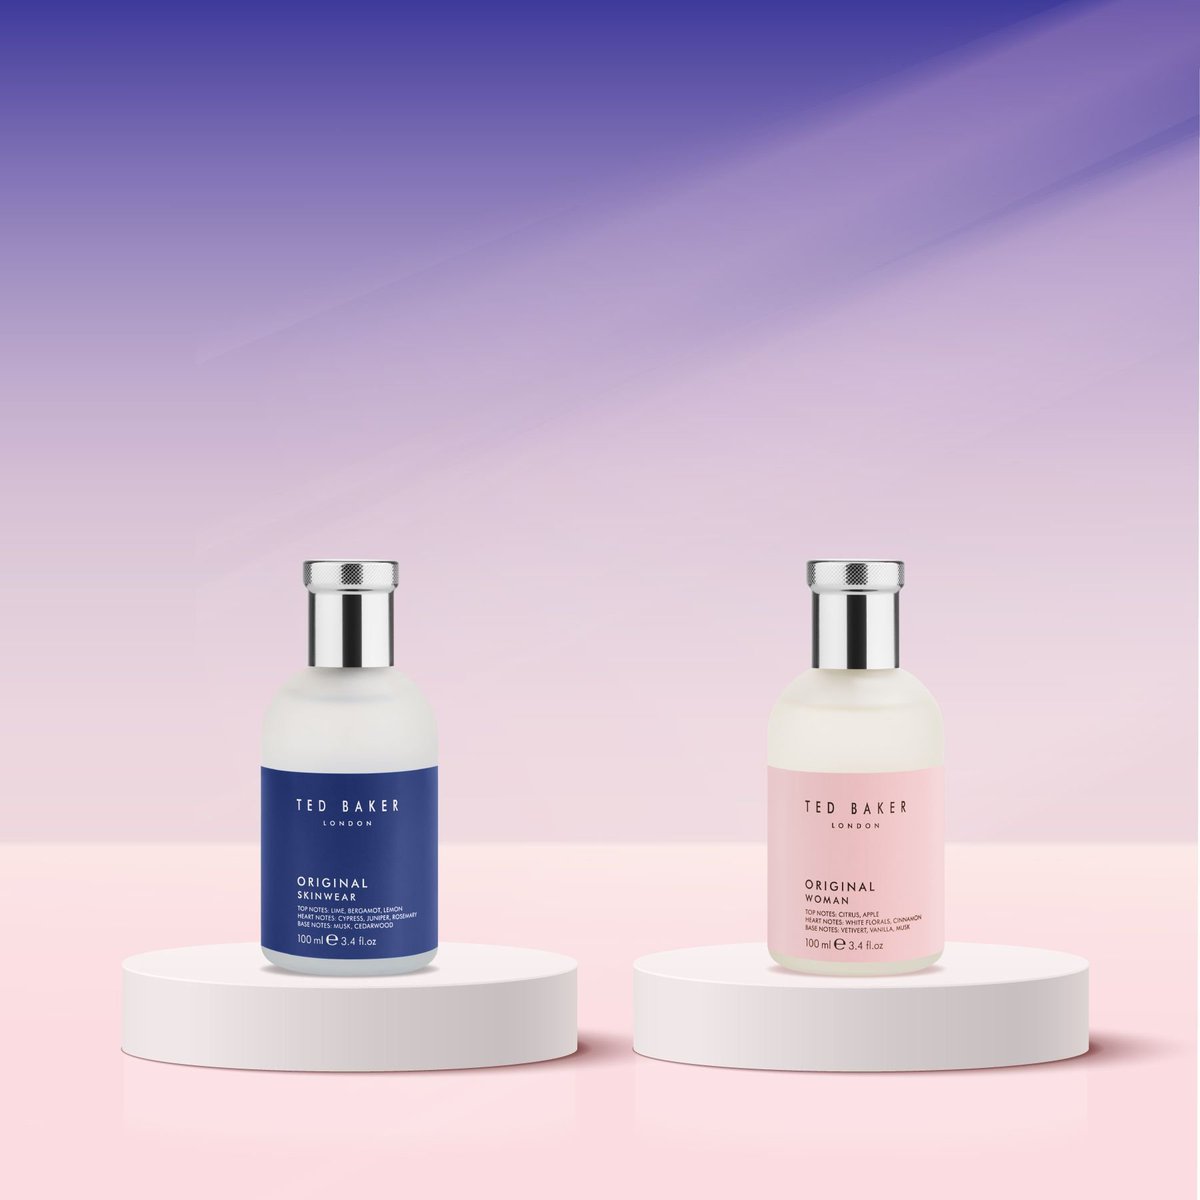 Discover your perfect match with #tedbaker skinwear and Woman. Now available in @superdrug stores. Get yours today! 💯 💫 
#PerfectDuo #BeautyEssentials